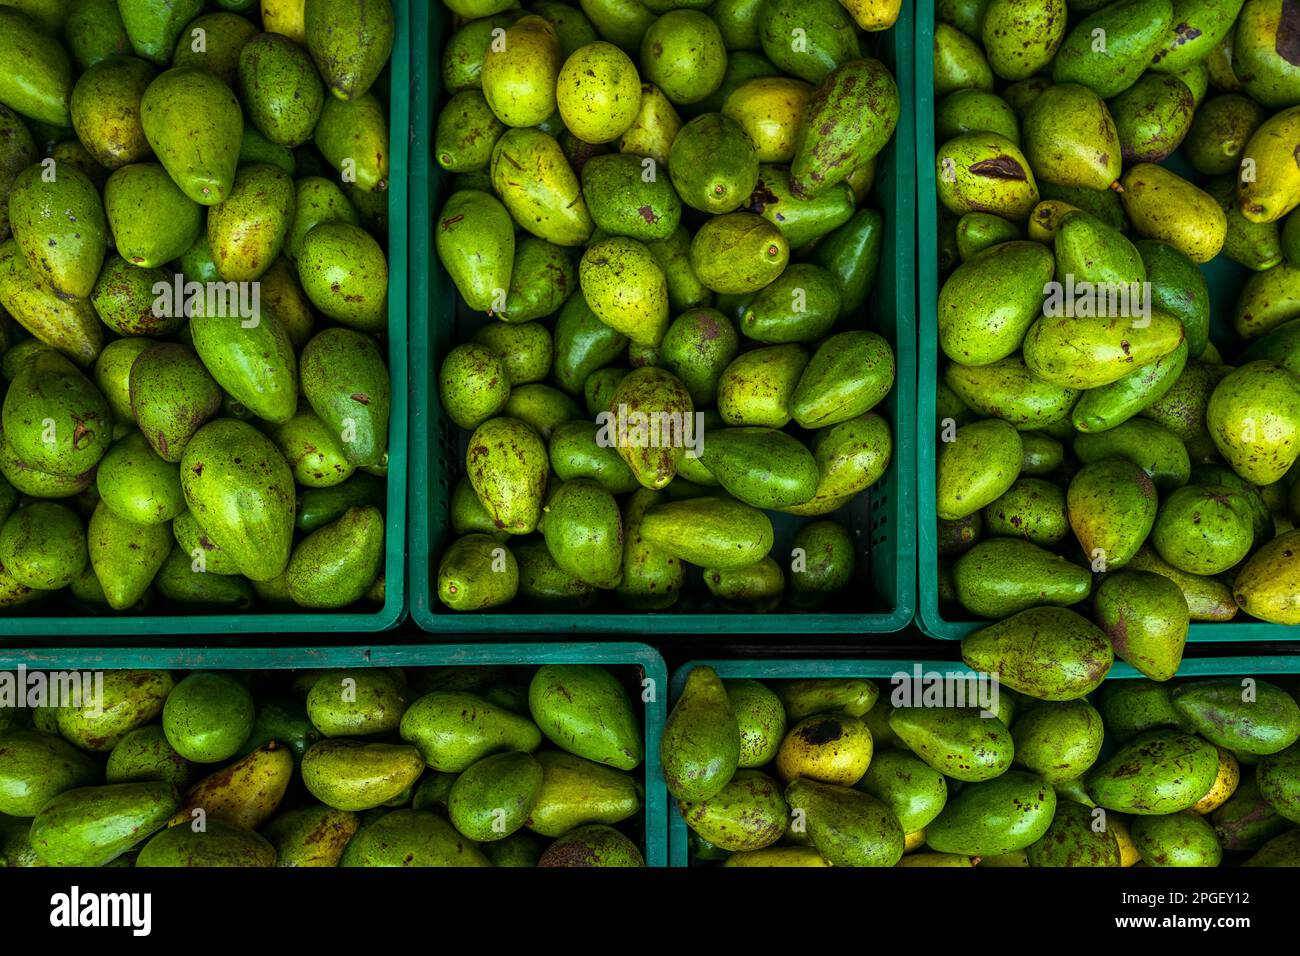 Plastic crates of fresh avocados, cultivated in local farms, are seen offered for sale in the street market in Cali, Colombia. Stock Photo